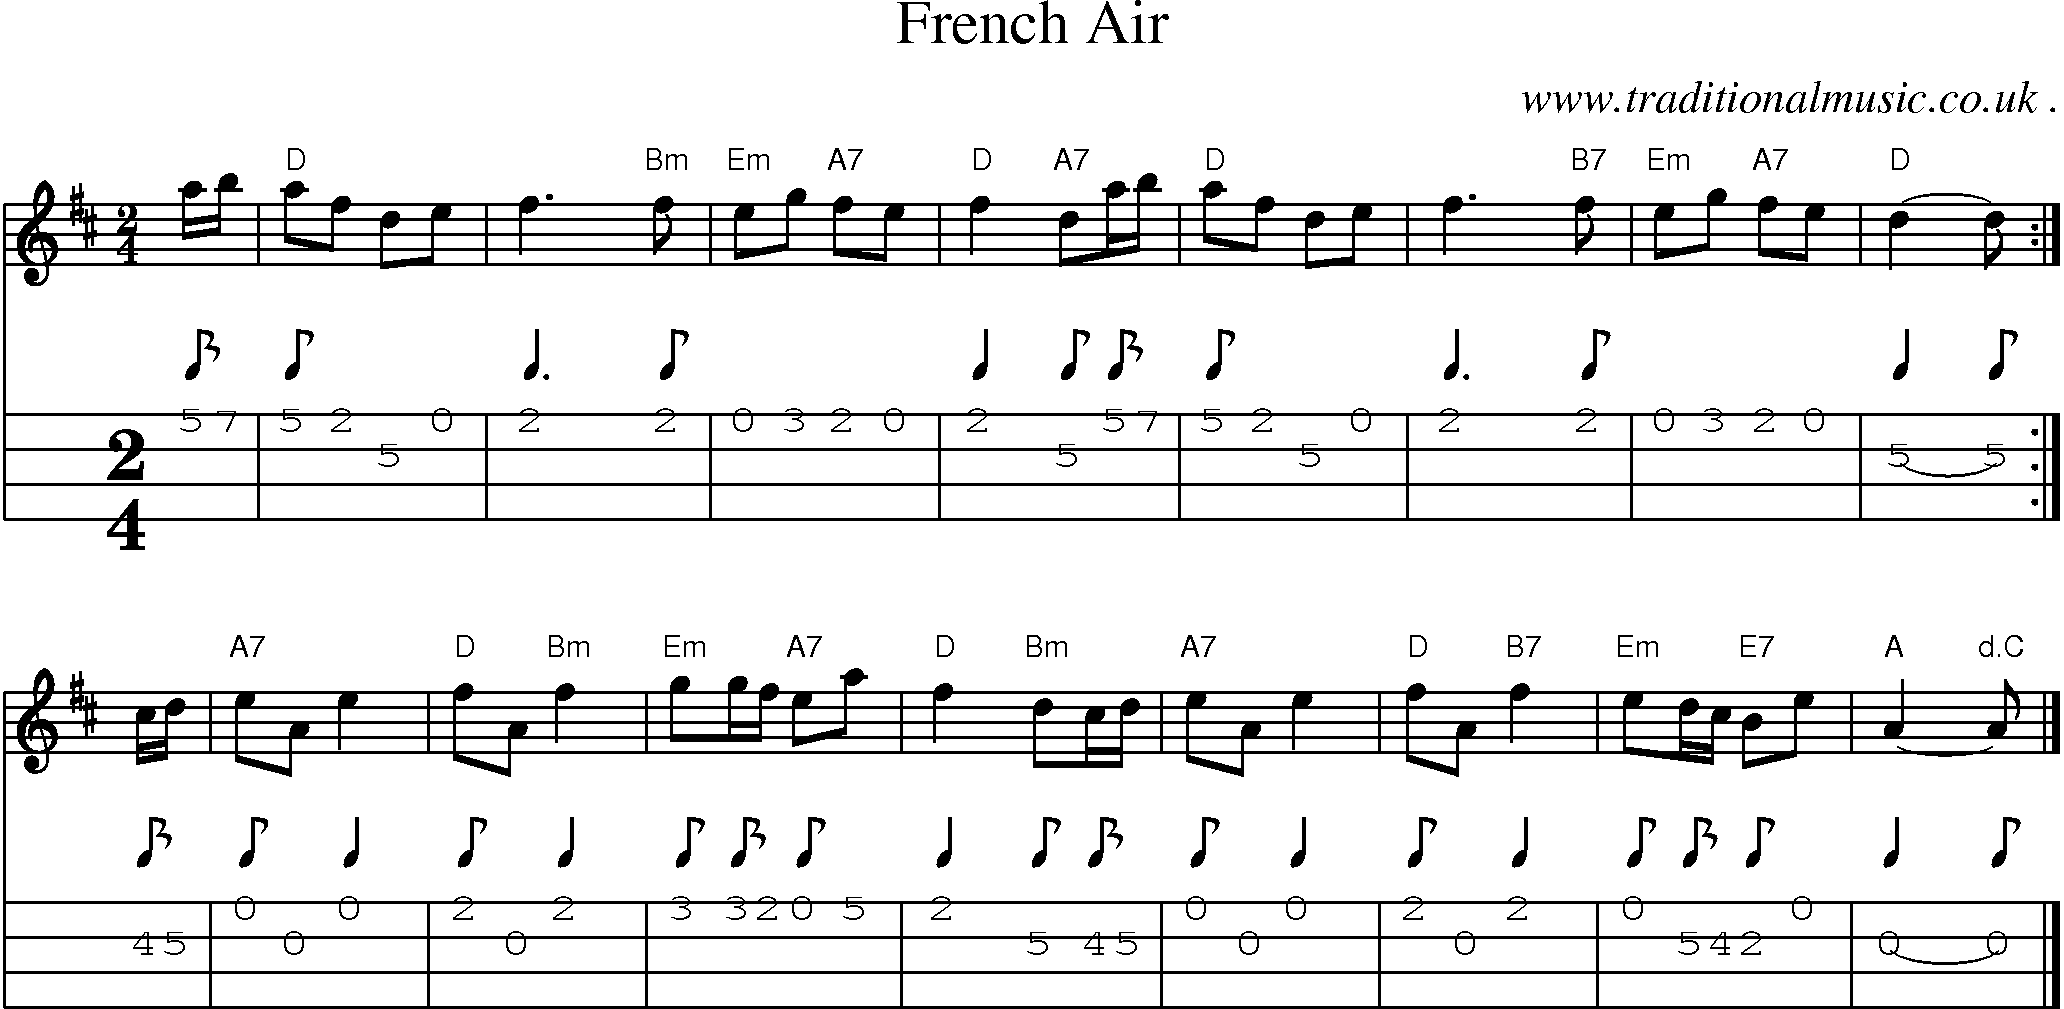 Sheet-music  score, Chords and Mandolin Tabs for French Air